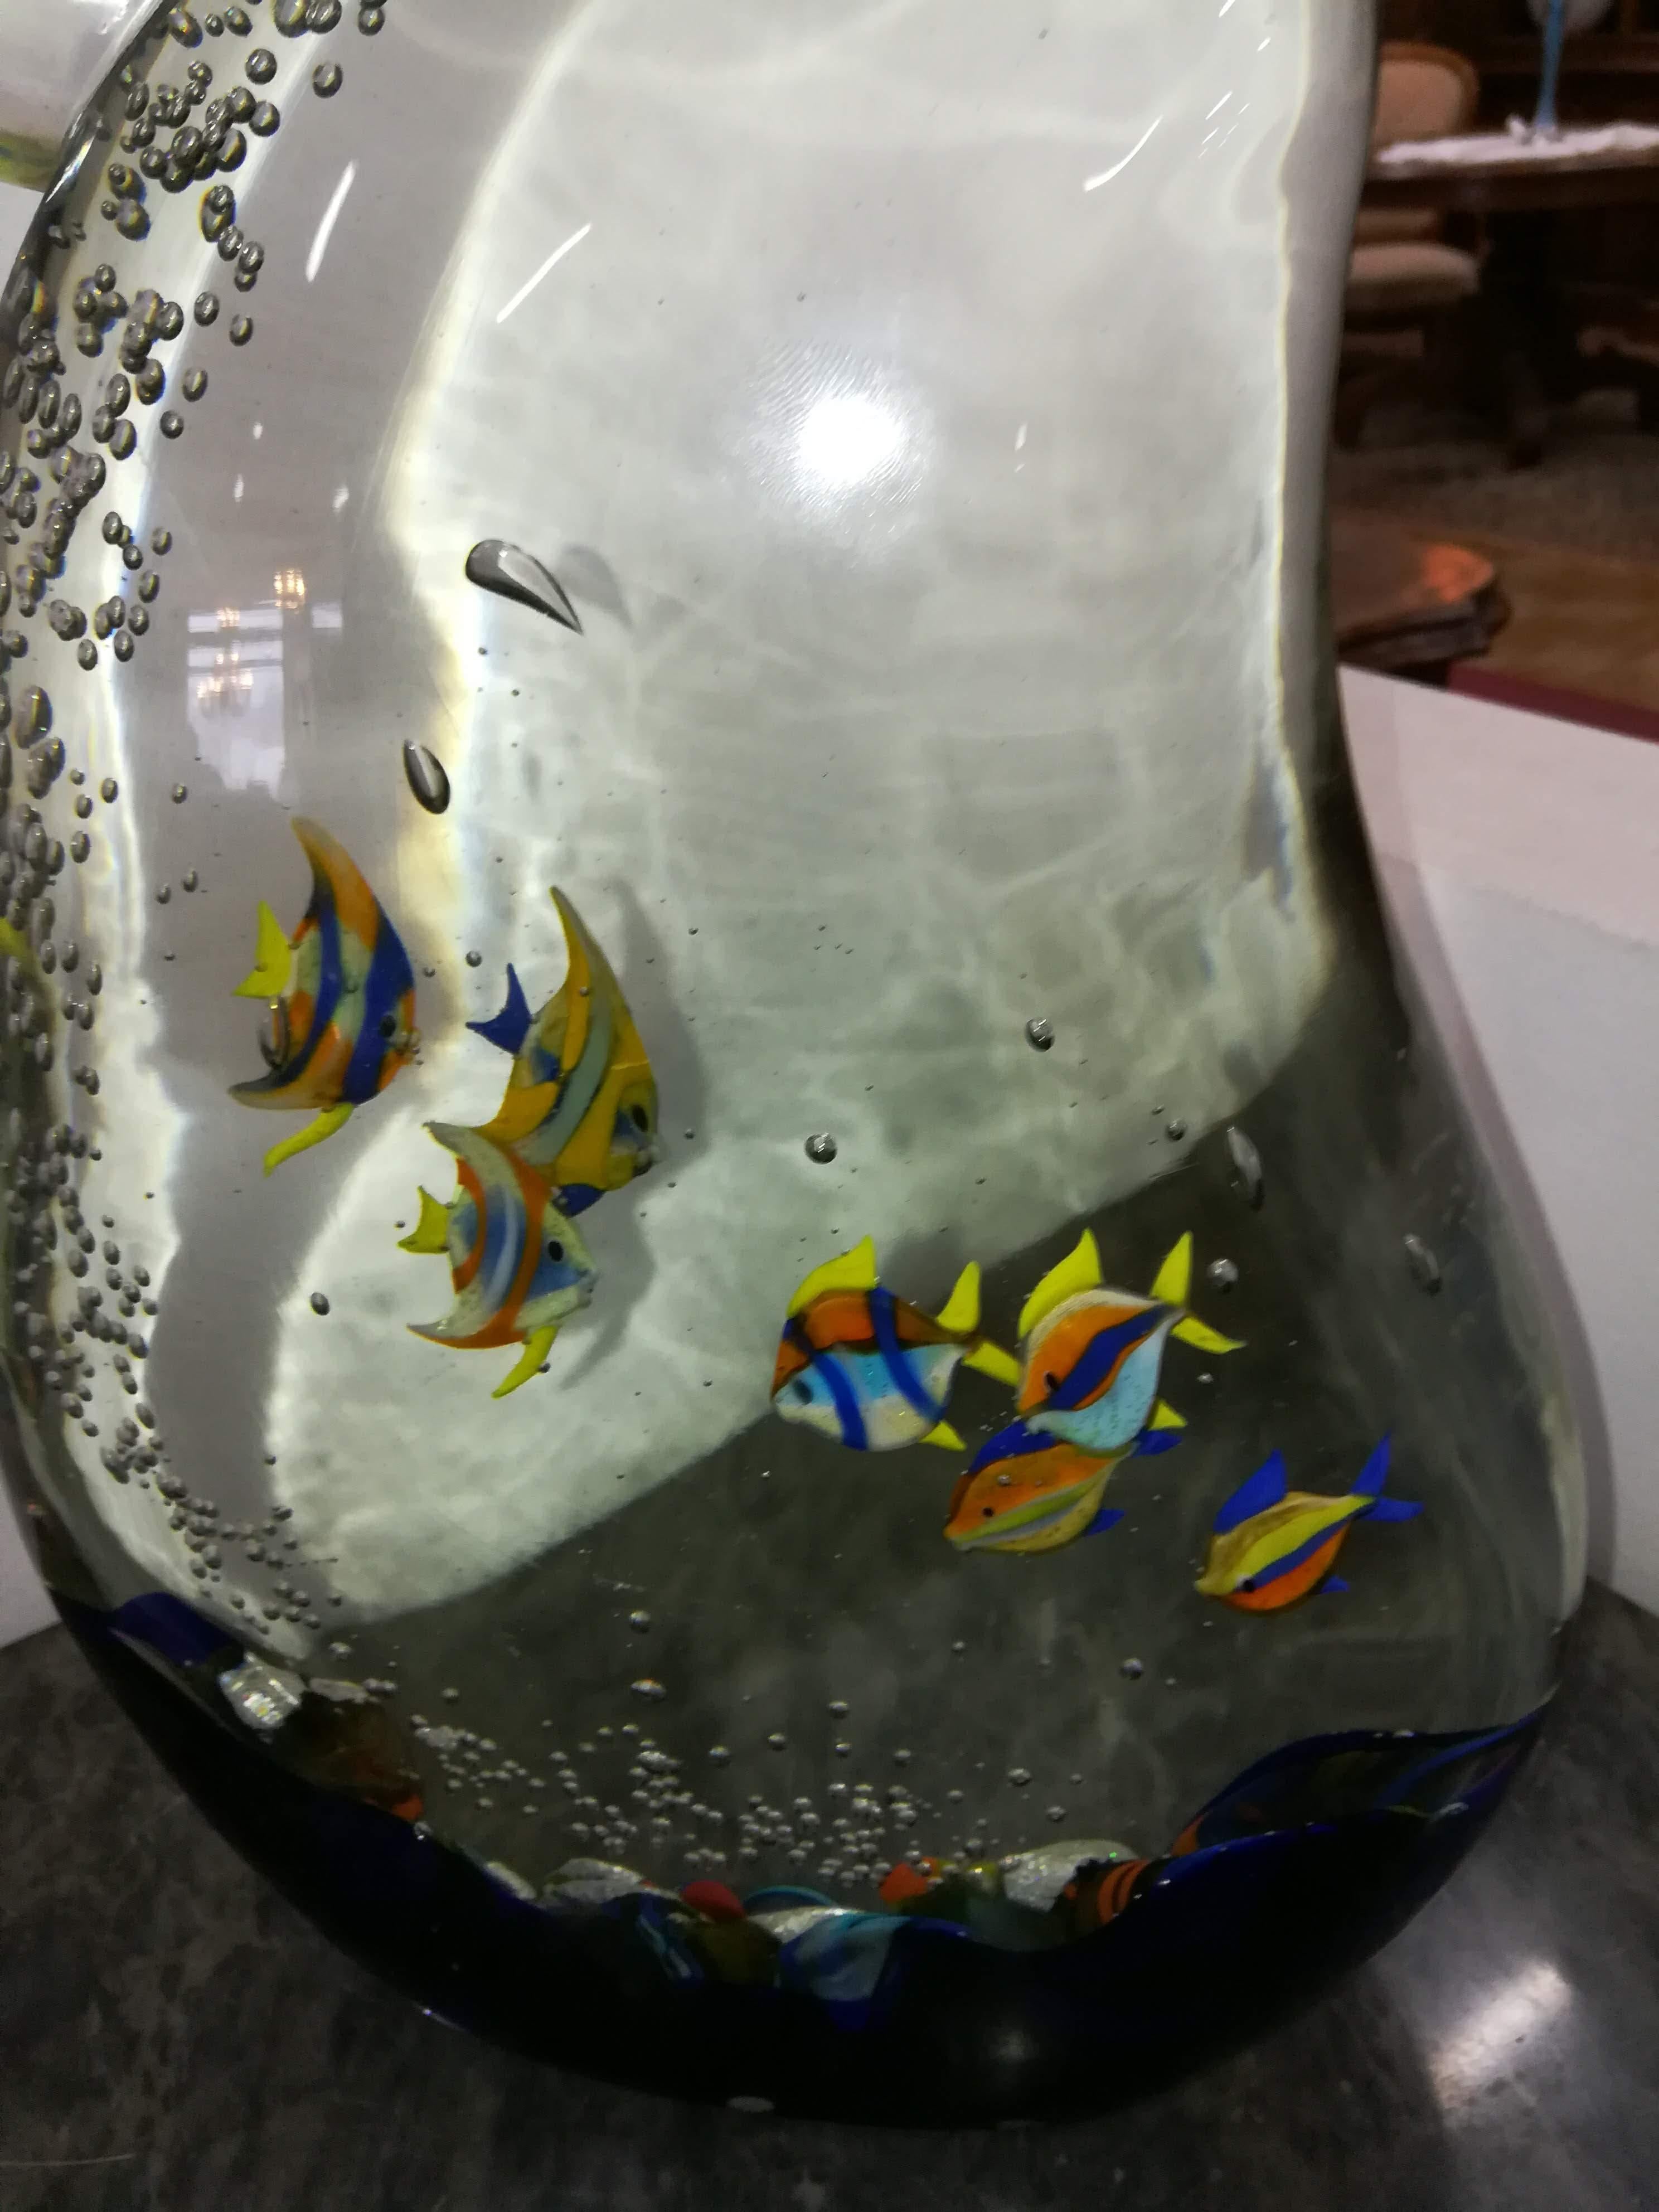 This is a blown glass aquarium made in Murano by Davide Donà.